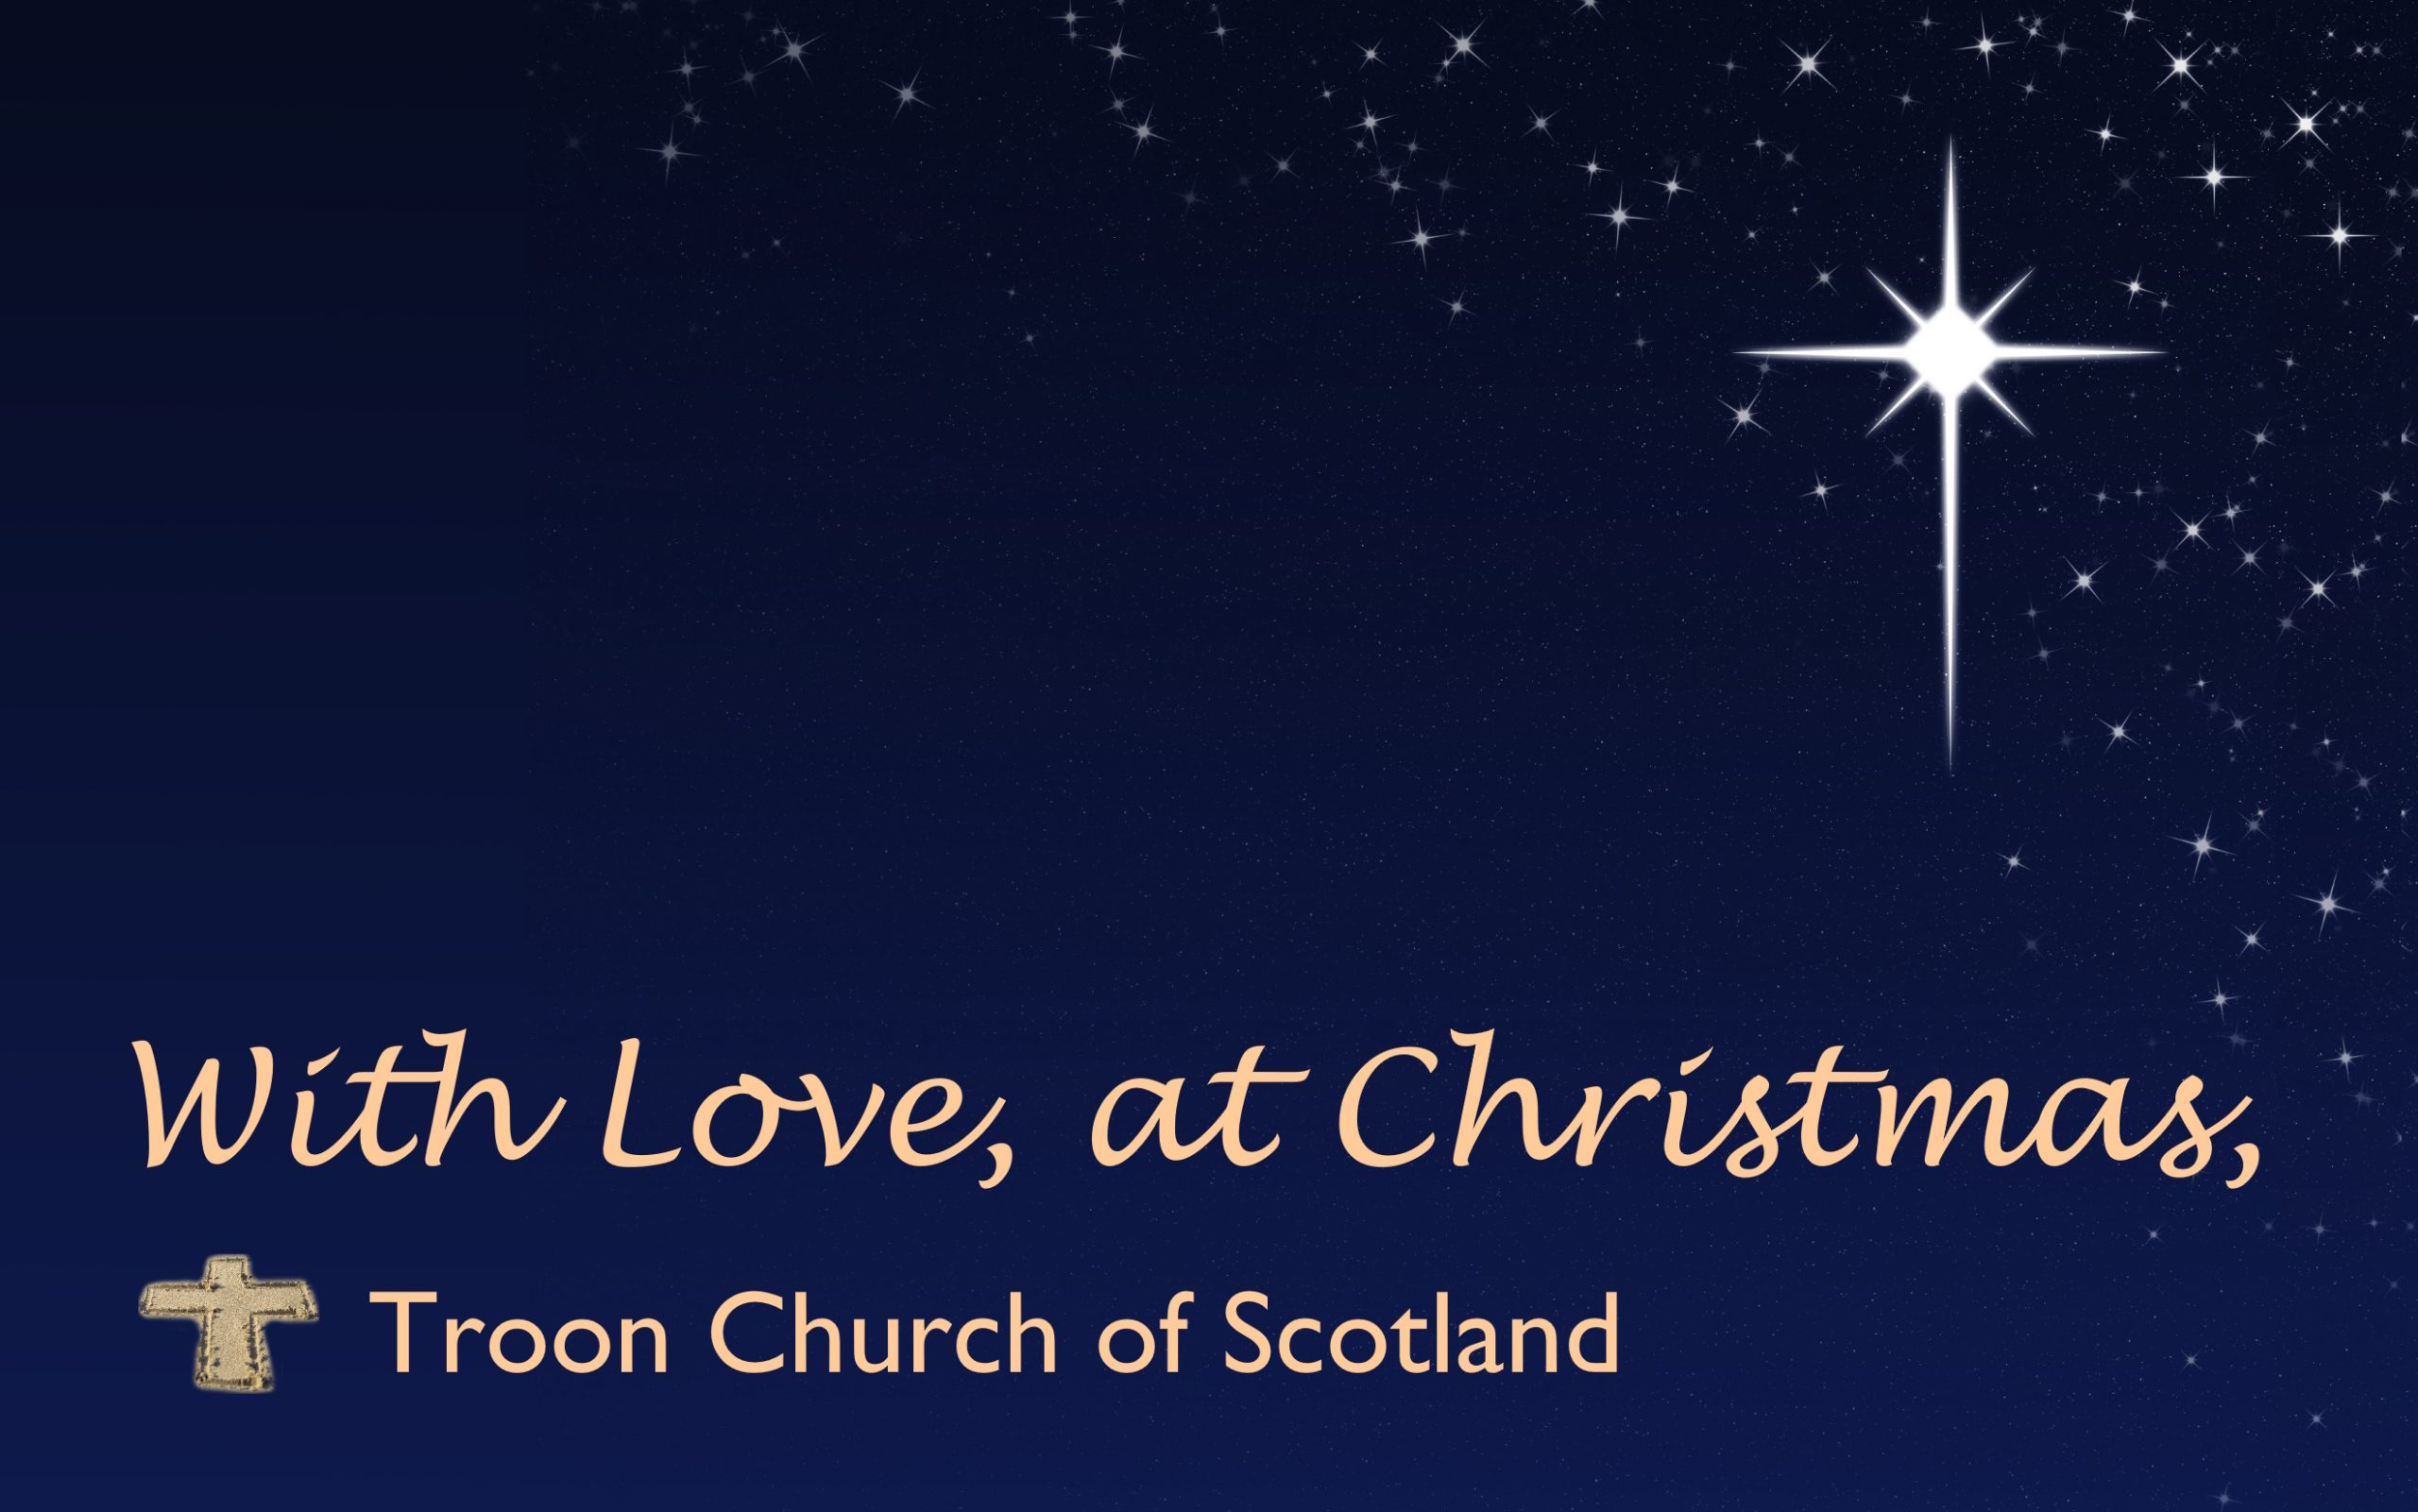 With Love, at Christmas, Troon Church of Scotland